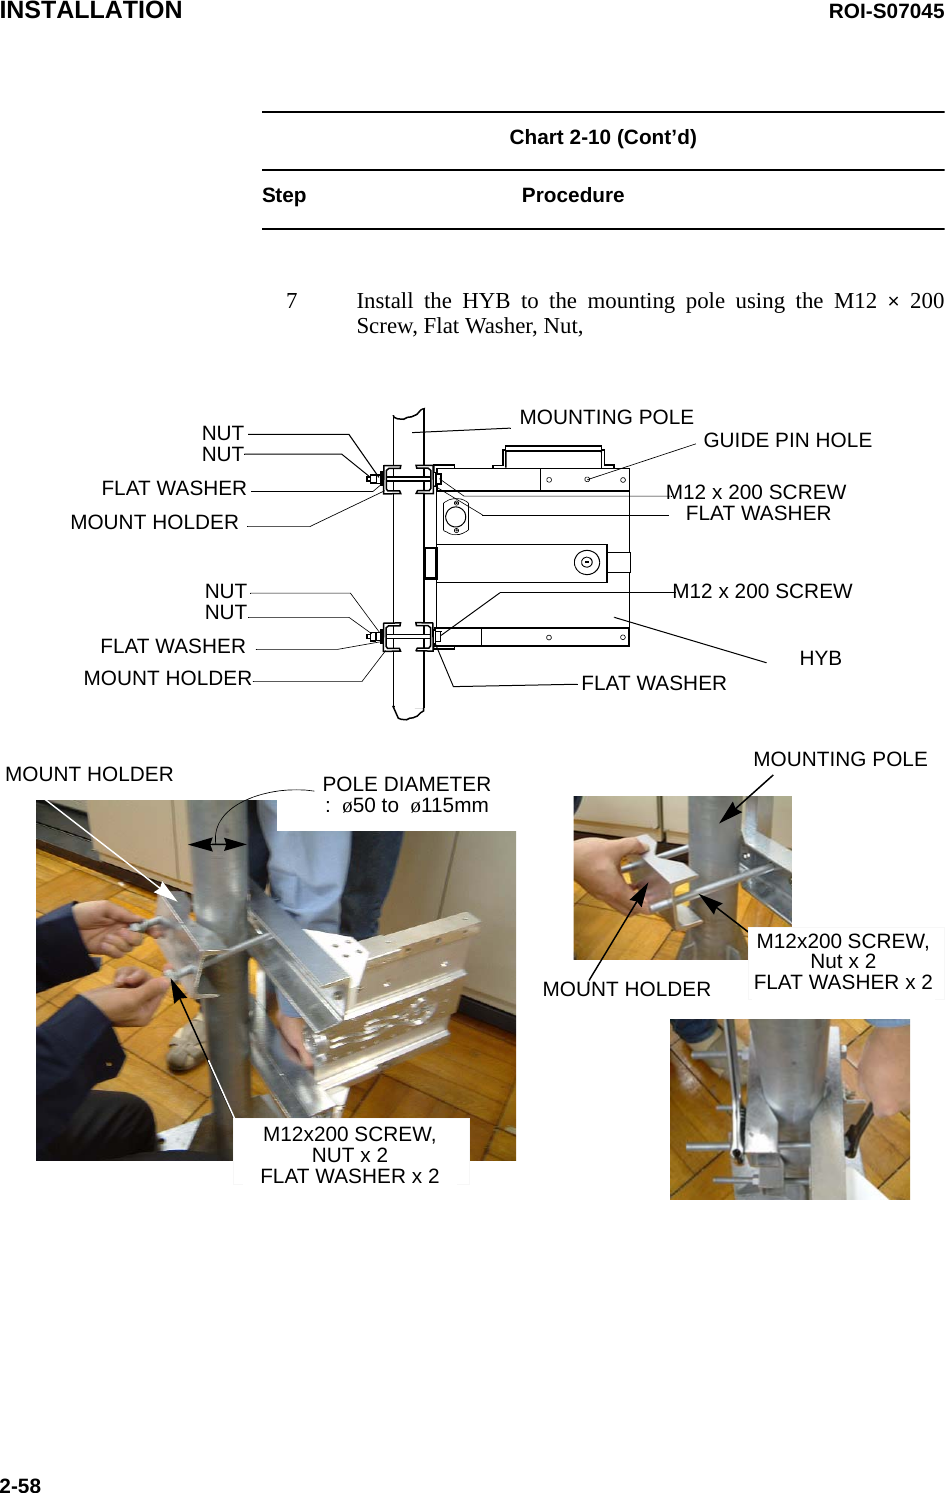 INSTALLATION ROI-S070452-58Chart 2-10 (Cont’d)Step Procedure7 Install the HYB to the mounting pole using the M12 × 200Screw, Flat Washer, Nut,MOUNT HOLDER POLE DIAMETER:  ø50 to  ø115mmMOUNT HOLDERM12x200 SCREW, NUT x 2FLAT WASHER x 2M12x200 SCREW, Nut x 2FLAT WASHER x 2MOUNT HOLDERM12 x 200 SCREWFLAT WASHERFLAT WASHERNUTNUTHYBMOUNTING POLEMOUNT HOLDERFLAT WASHERNUTNUTFLAT WASHERM12 x 200 SCREWMOUNTING POLEGUIDE PIN HOLE